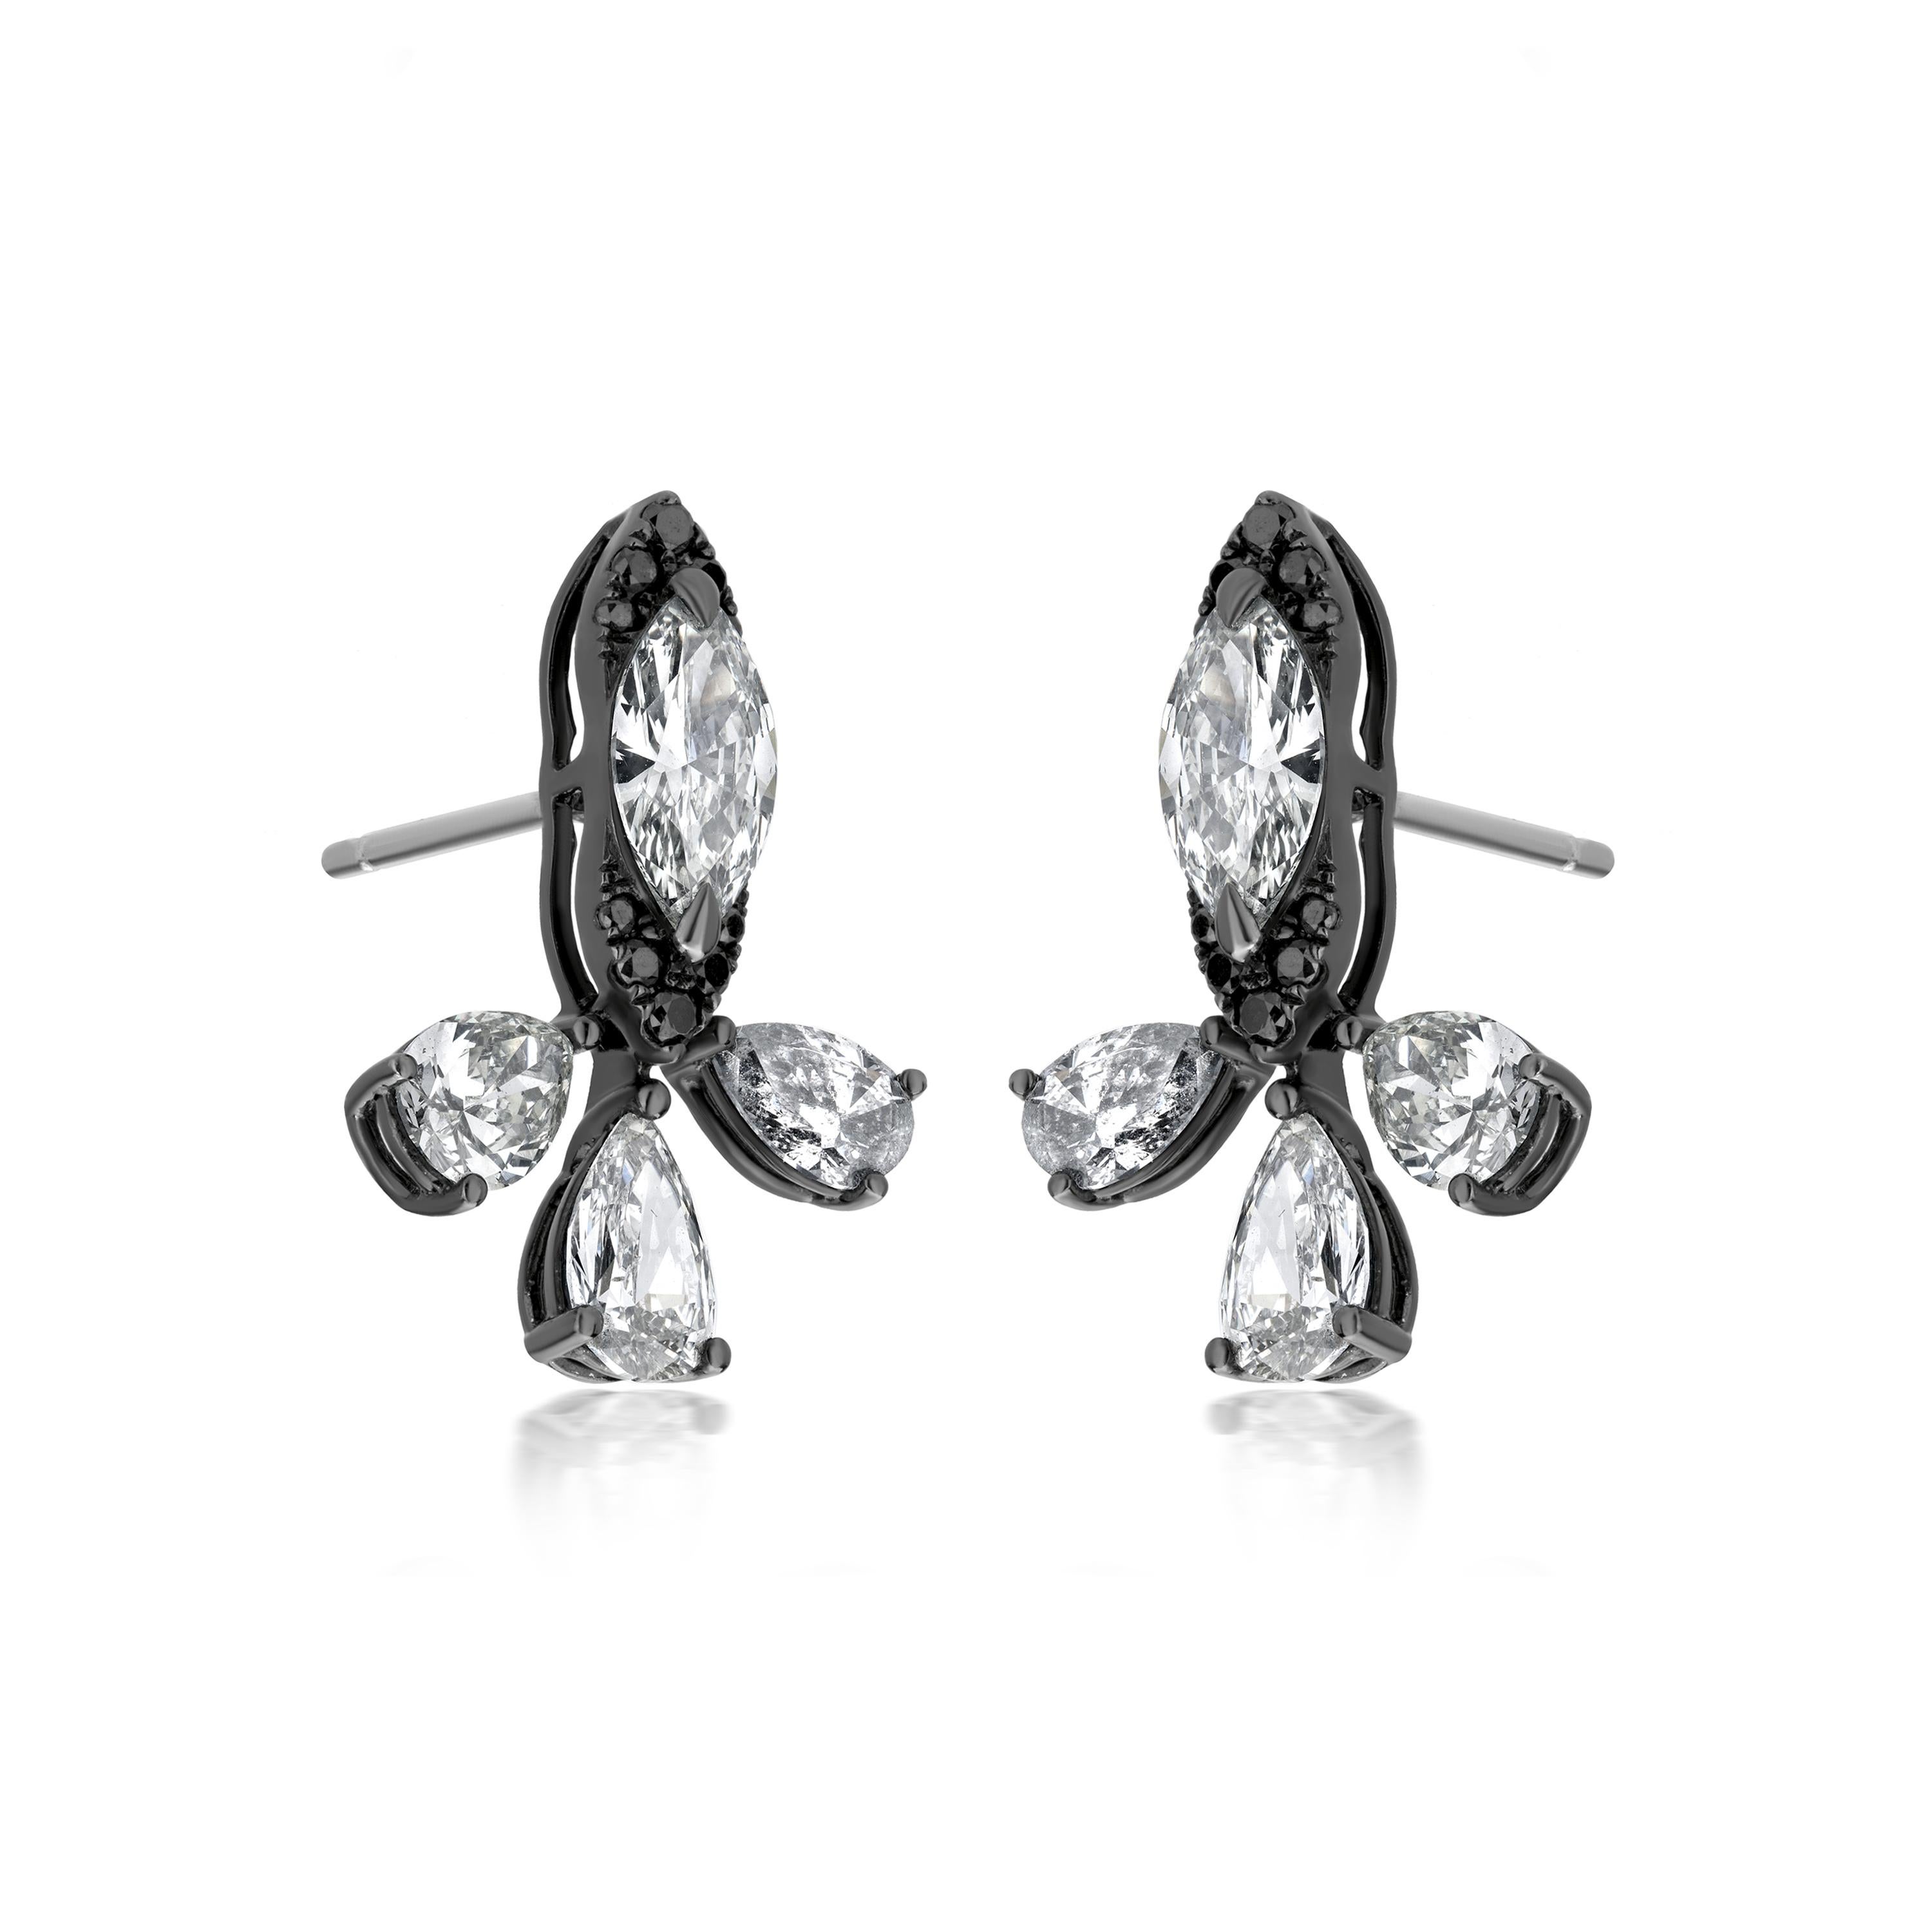 These chic on-ear studs are made by Luxle with a fusion of black and white diamonds. The surmount features a marquise diamond cased in a halo of black diamonds. Three pear diamonds hang from the surmount like bells.
Please follow the Luxury Jewels